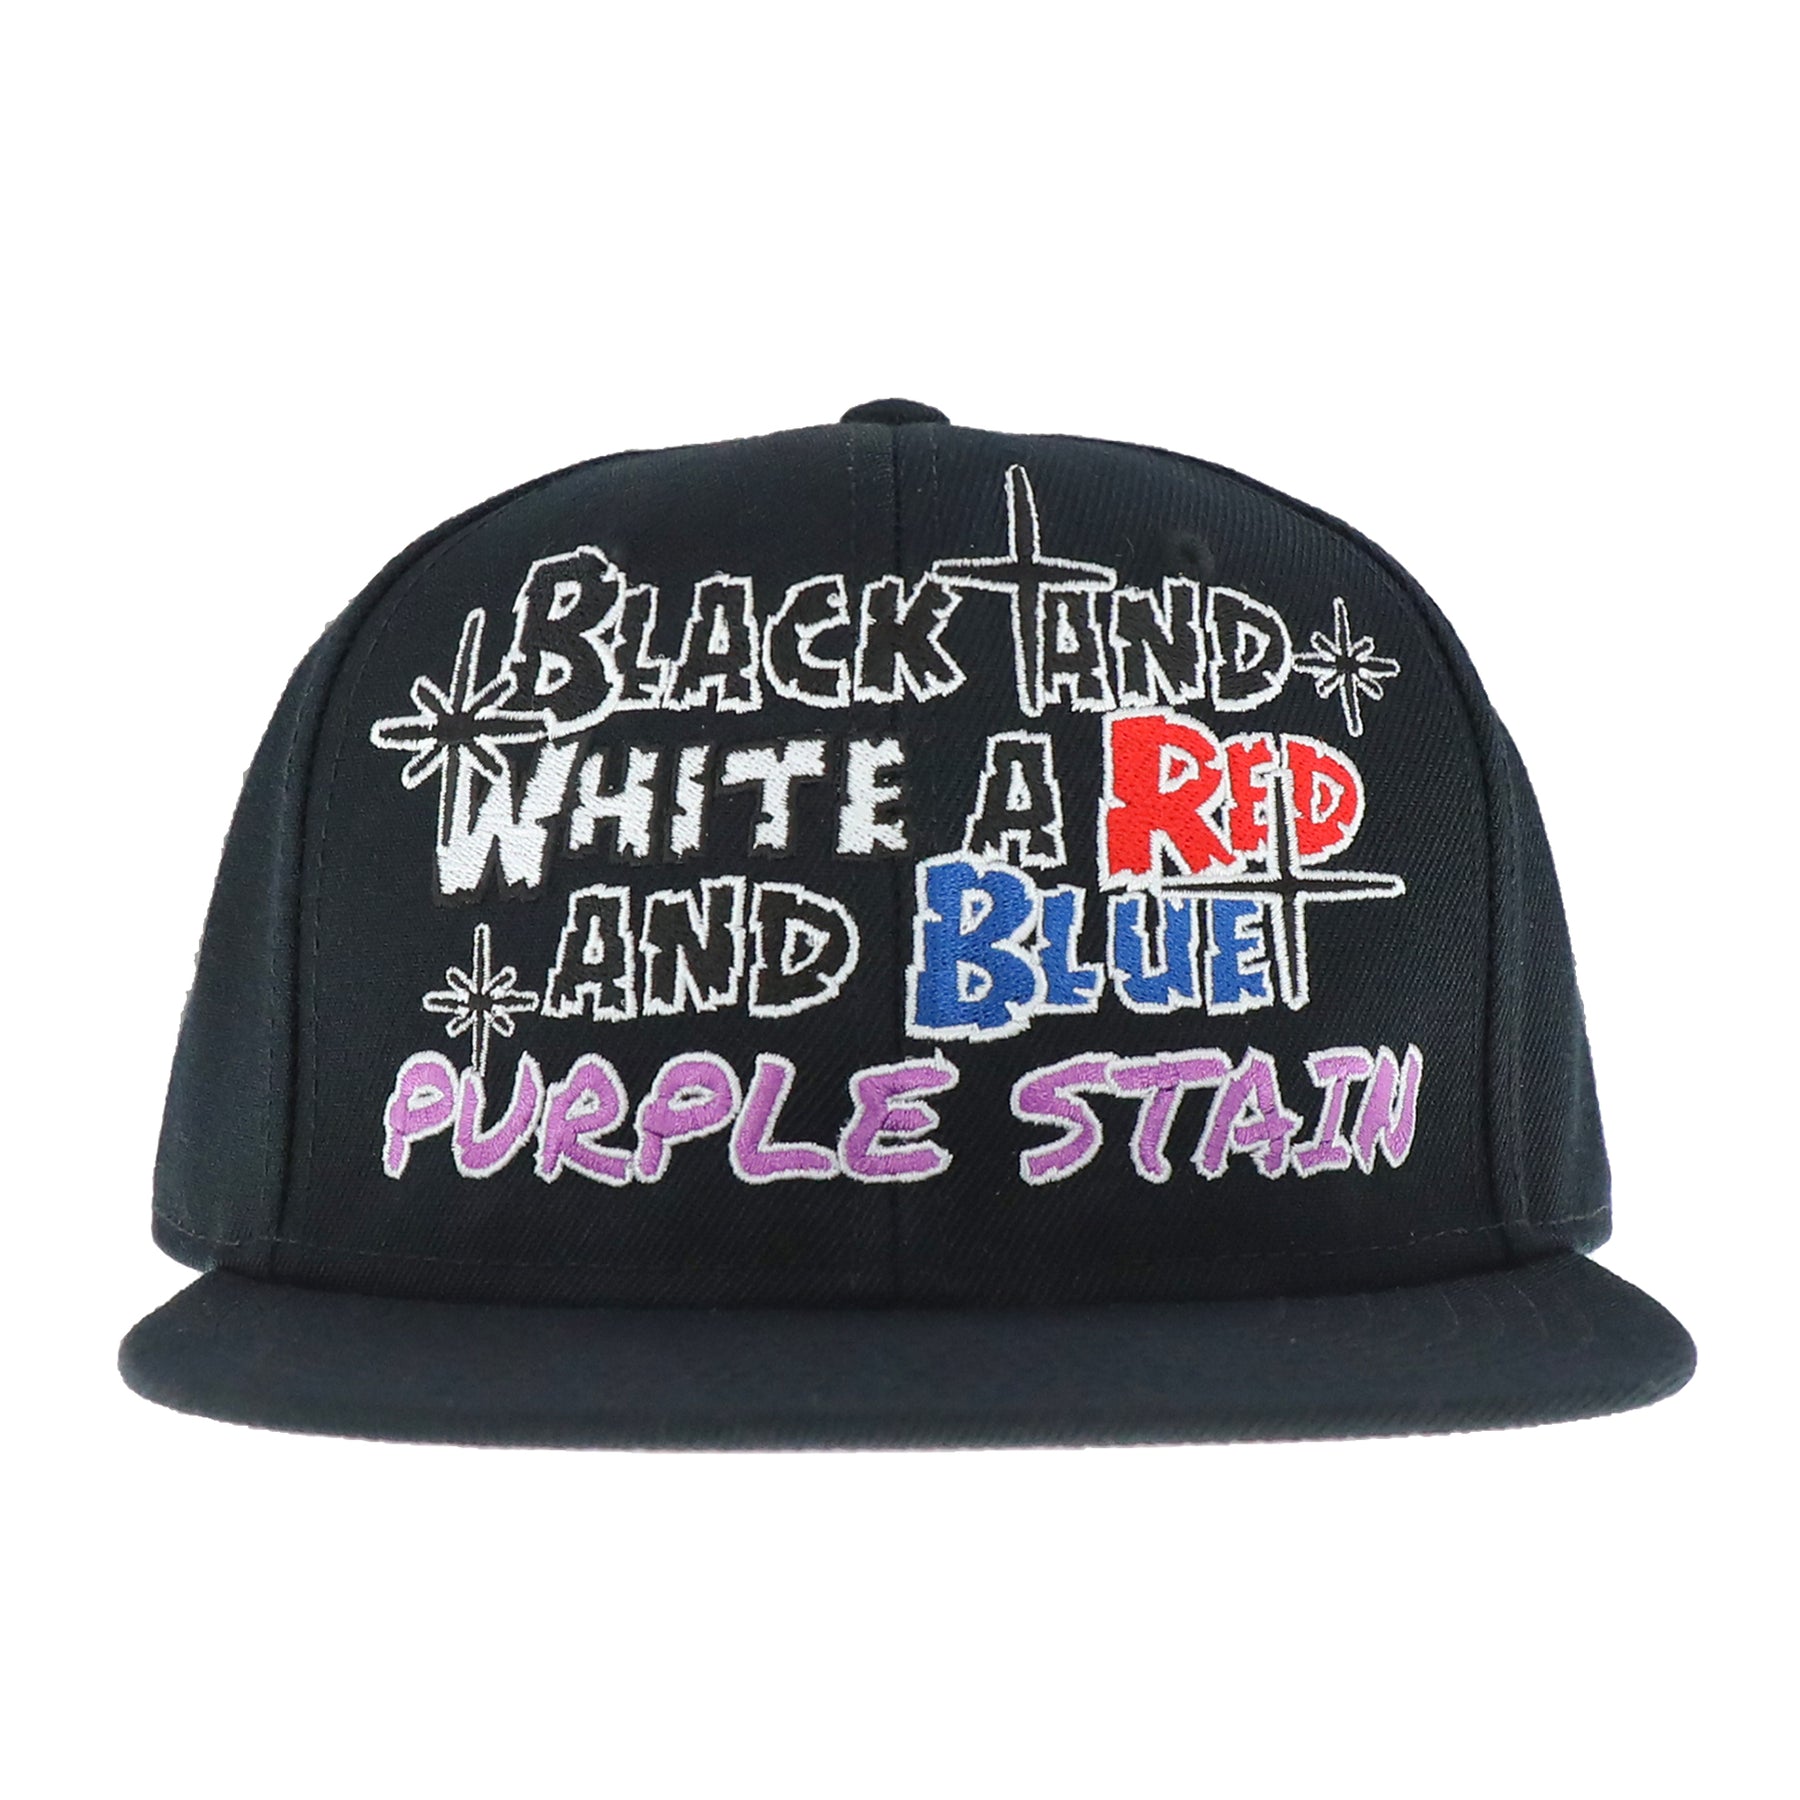 PURPLE STAIN RED AND BLUE BASEBALL CAP / BLK